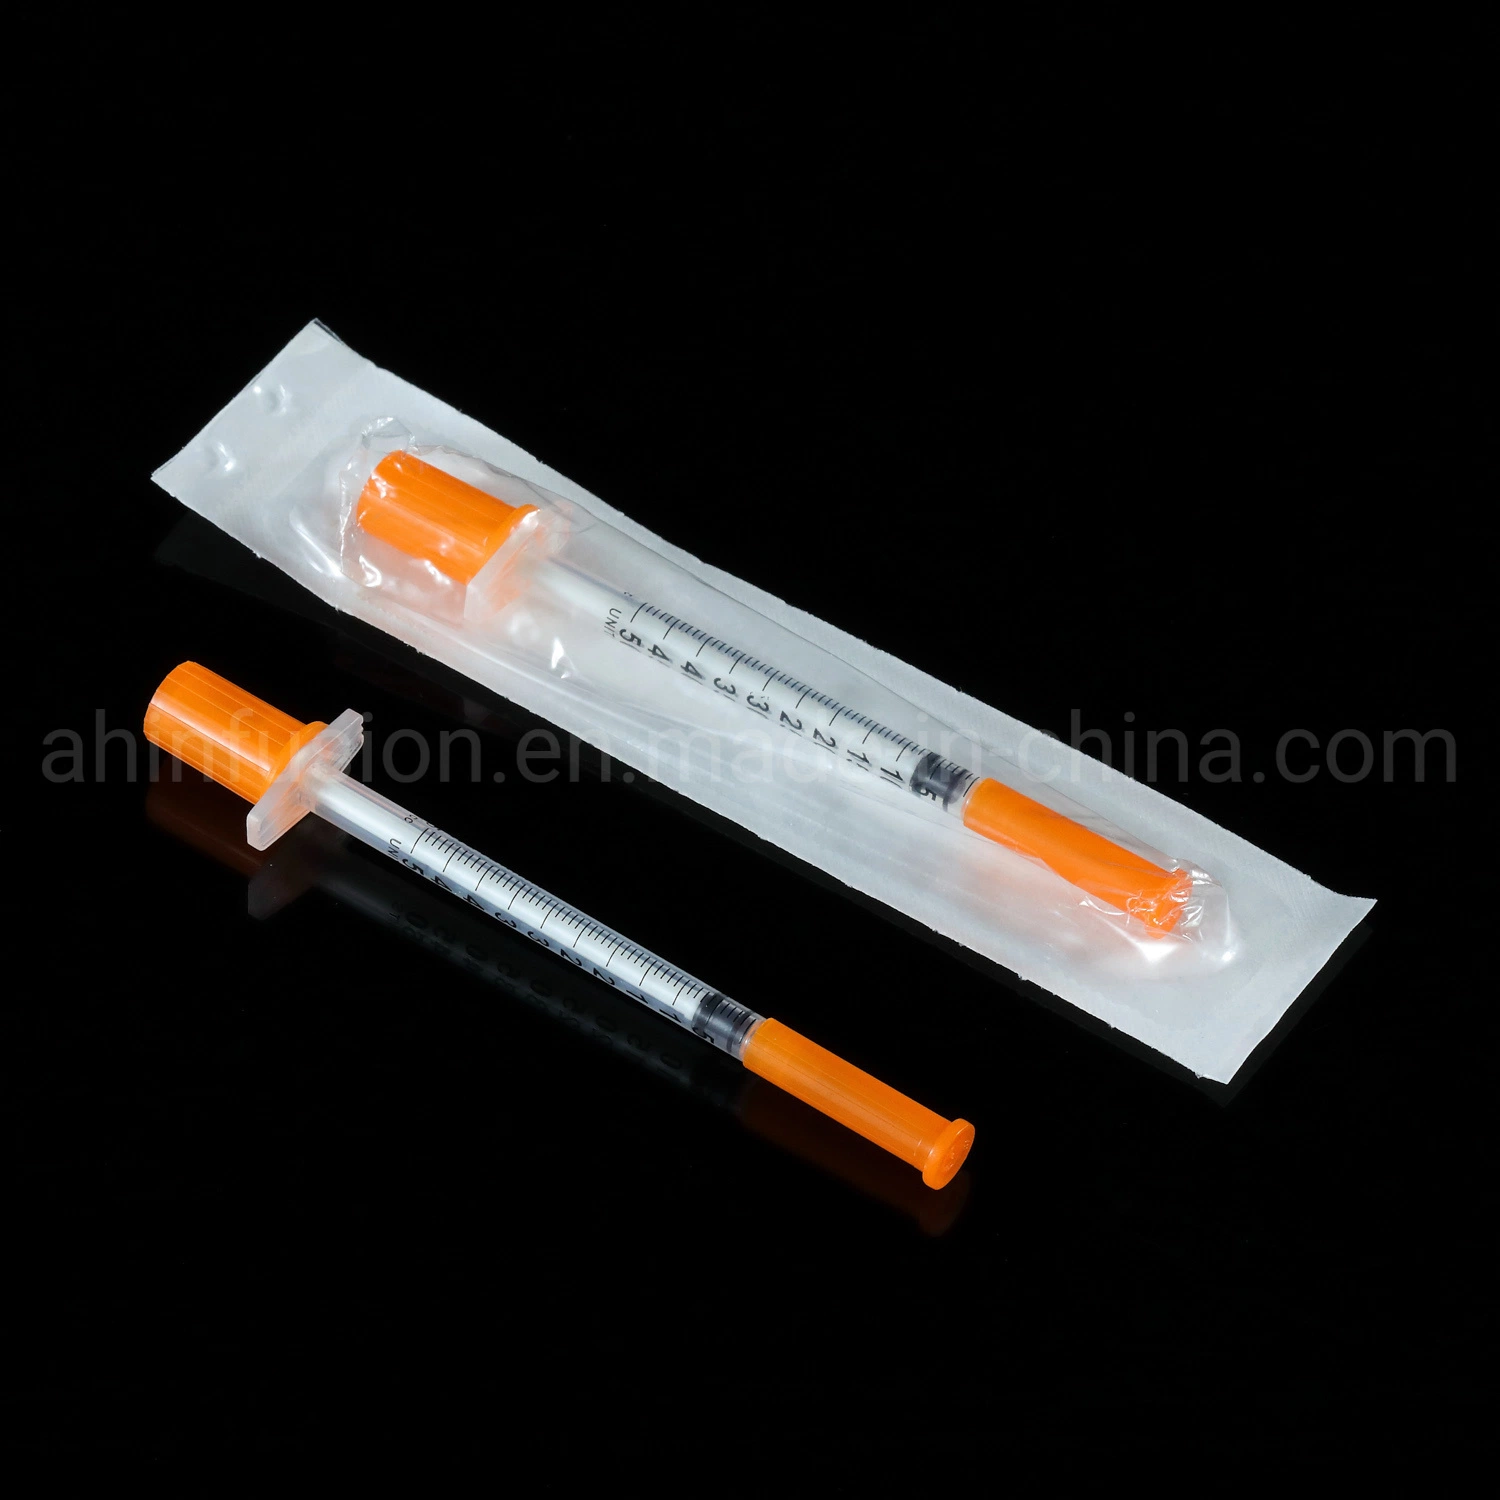 Sterile 3 Part Disposable Insulin Syringe with Fixed Needle